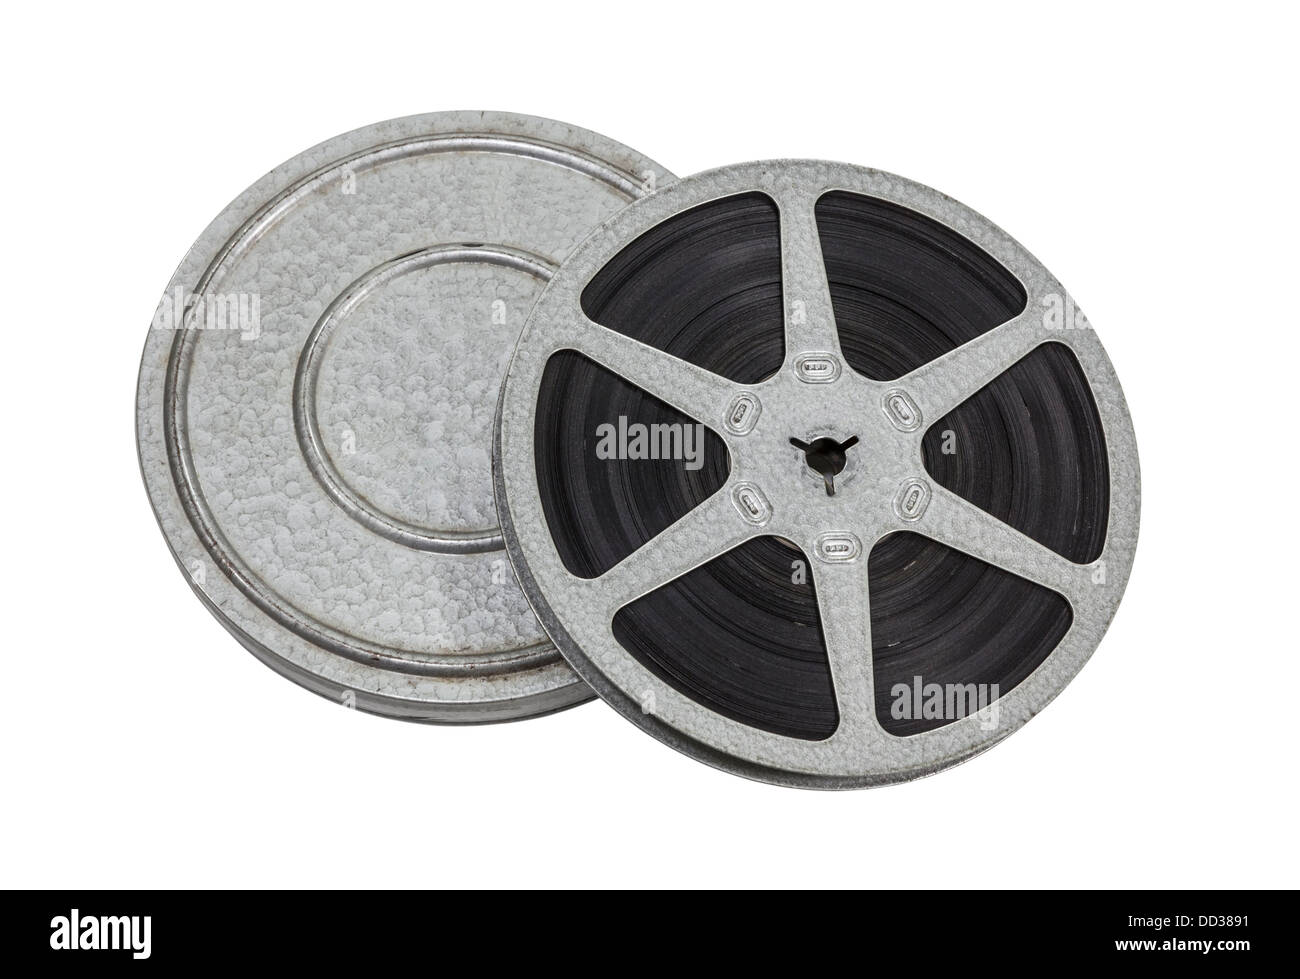 https://c8.alamy.com/comp/DD3891/vintage-film-reel-and-can-isolated-with-clipping-path-DD3891.jpg